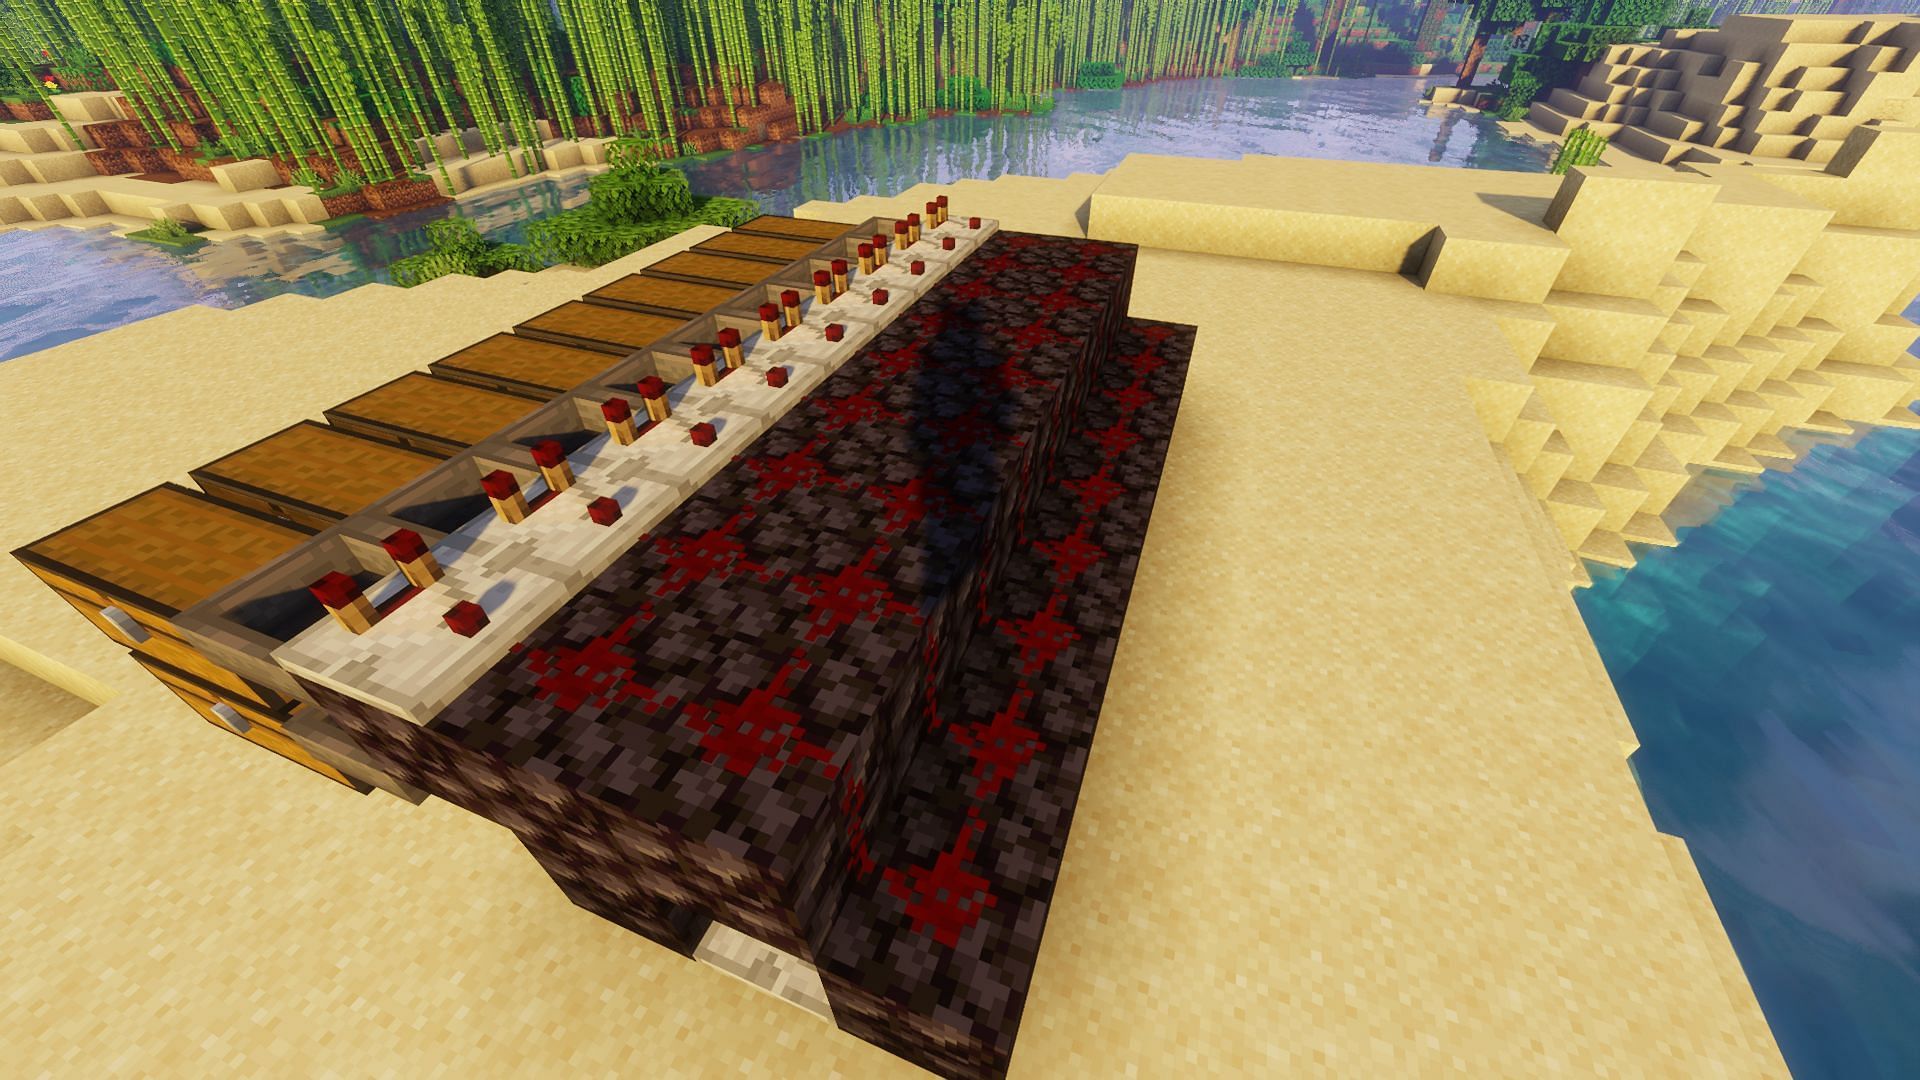 The redstone comparators and redstone dust placed atop the platform (Image via Minecraft)